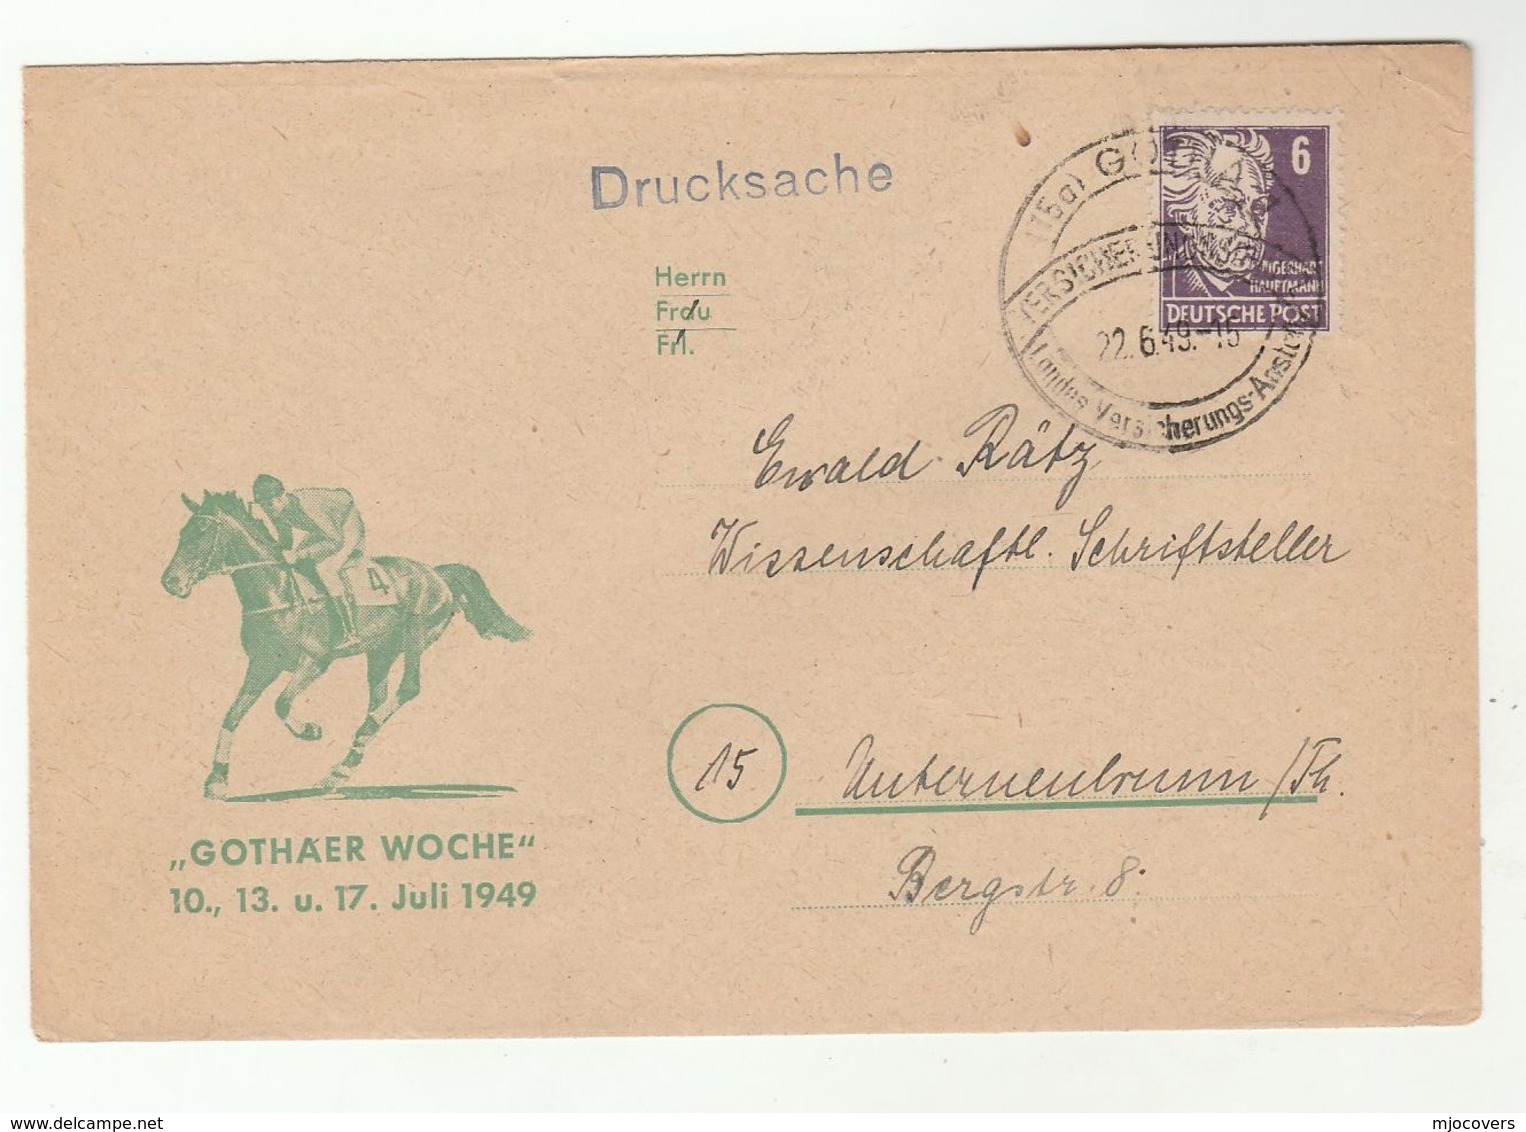 1949 Gotha HORSE RACING  WEEK  Illus ADVERT COVER Germany Stamps Allied Zone Horses Race Sport - Horses